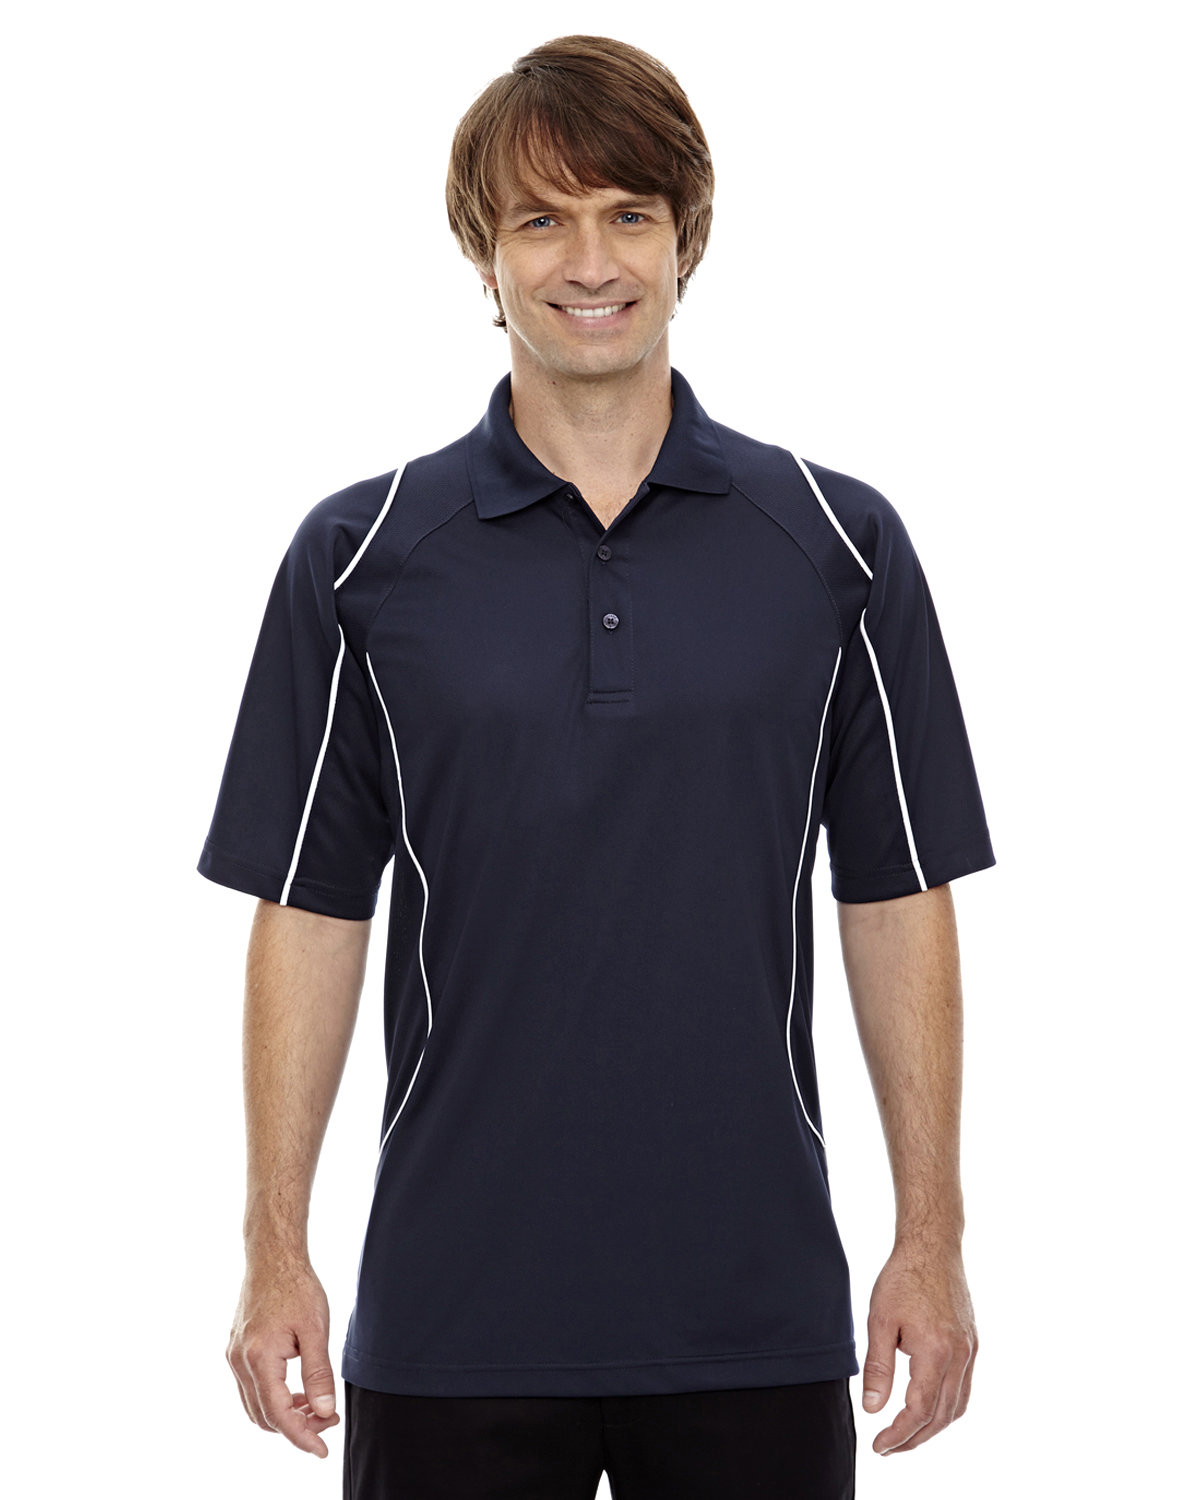 Extreme Men's Eperformance™ Velocity Snag Protection Colorblock Polo with Piping CLASSIC NAVY 